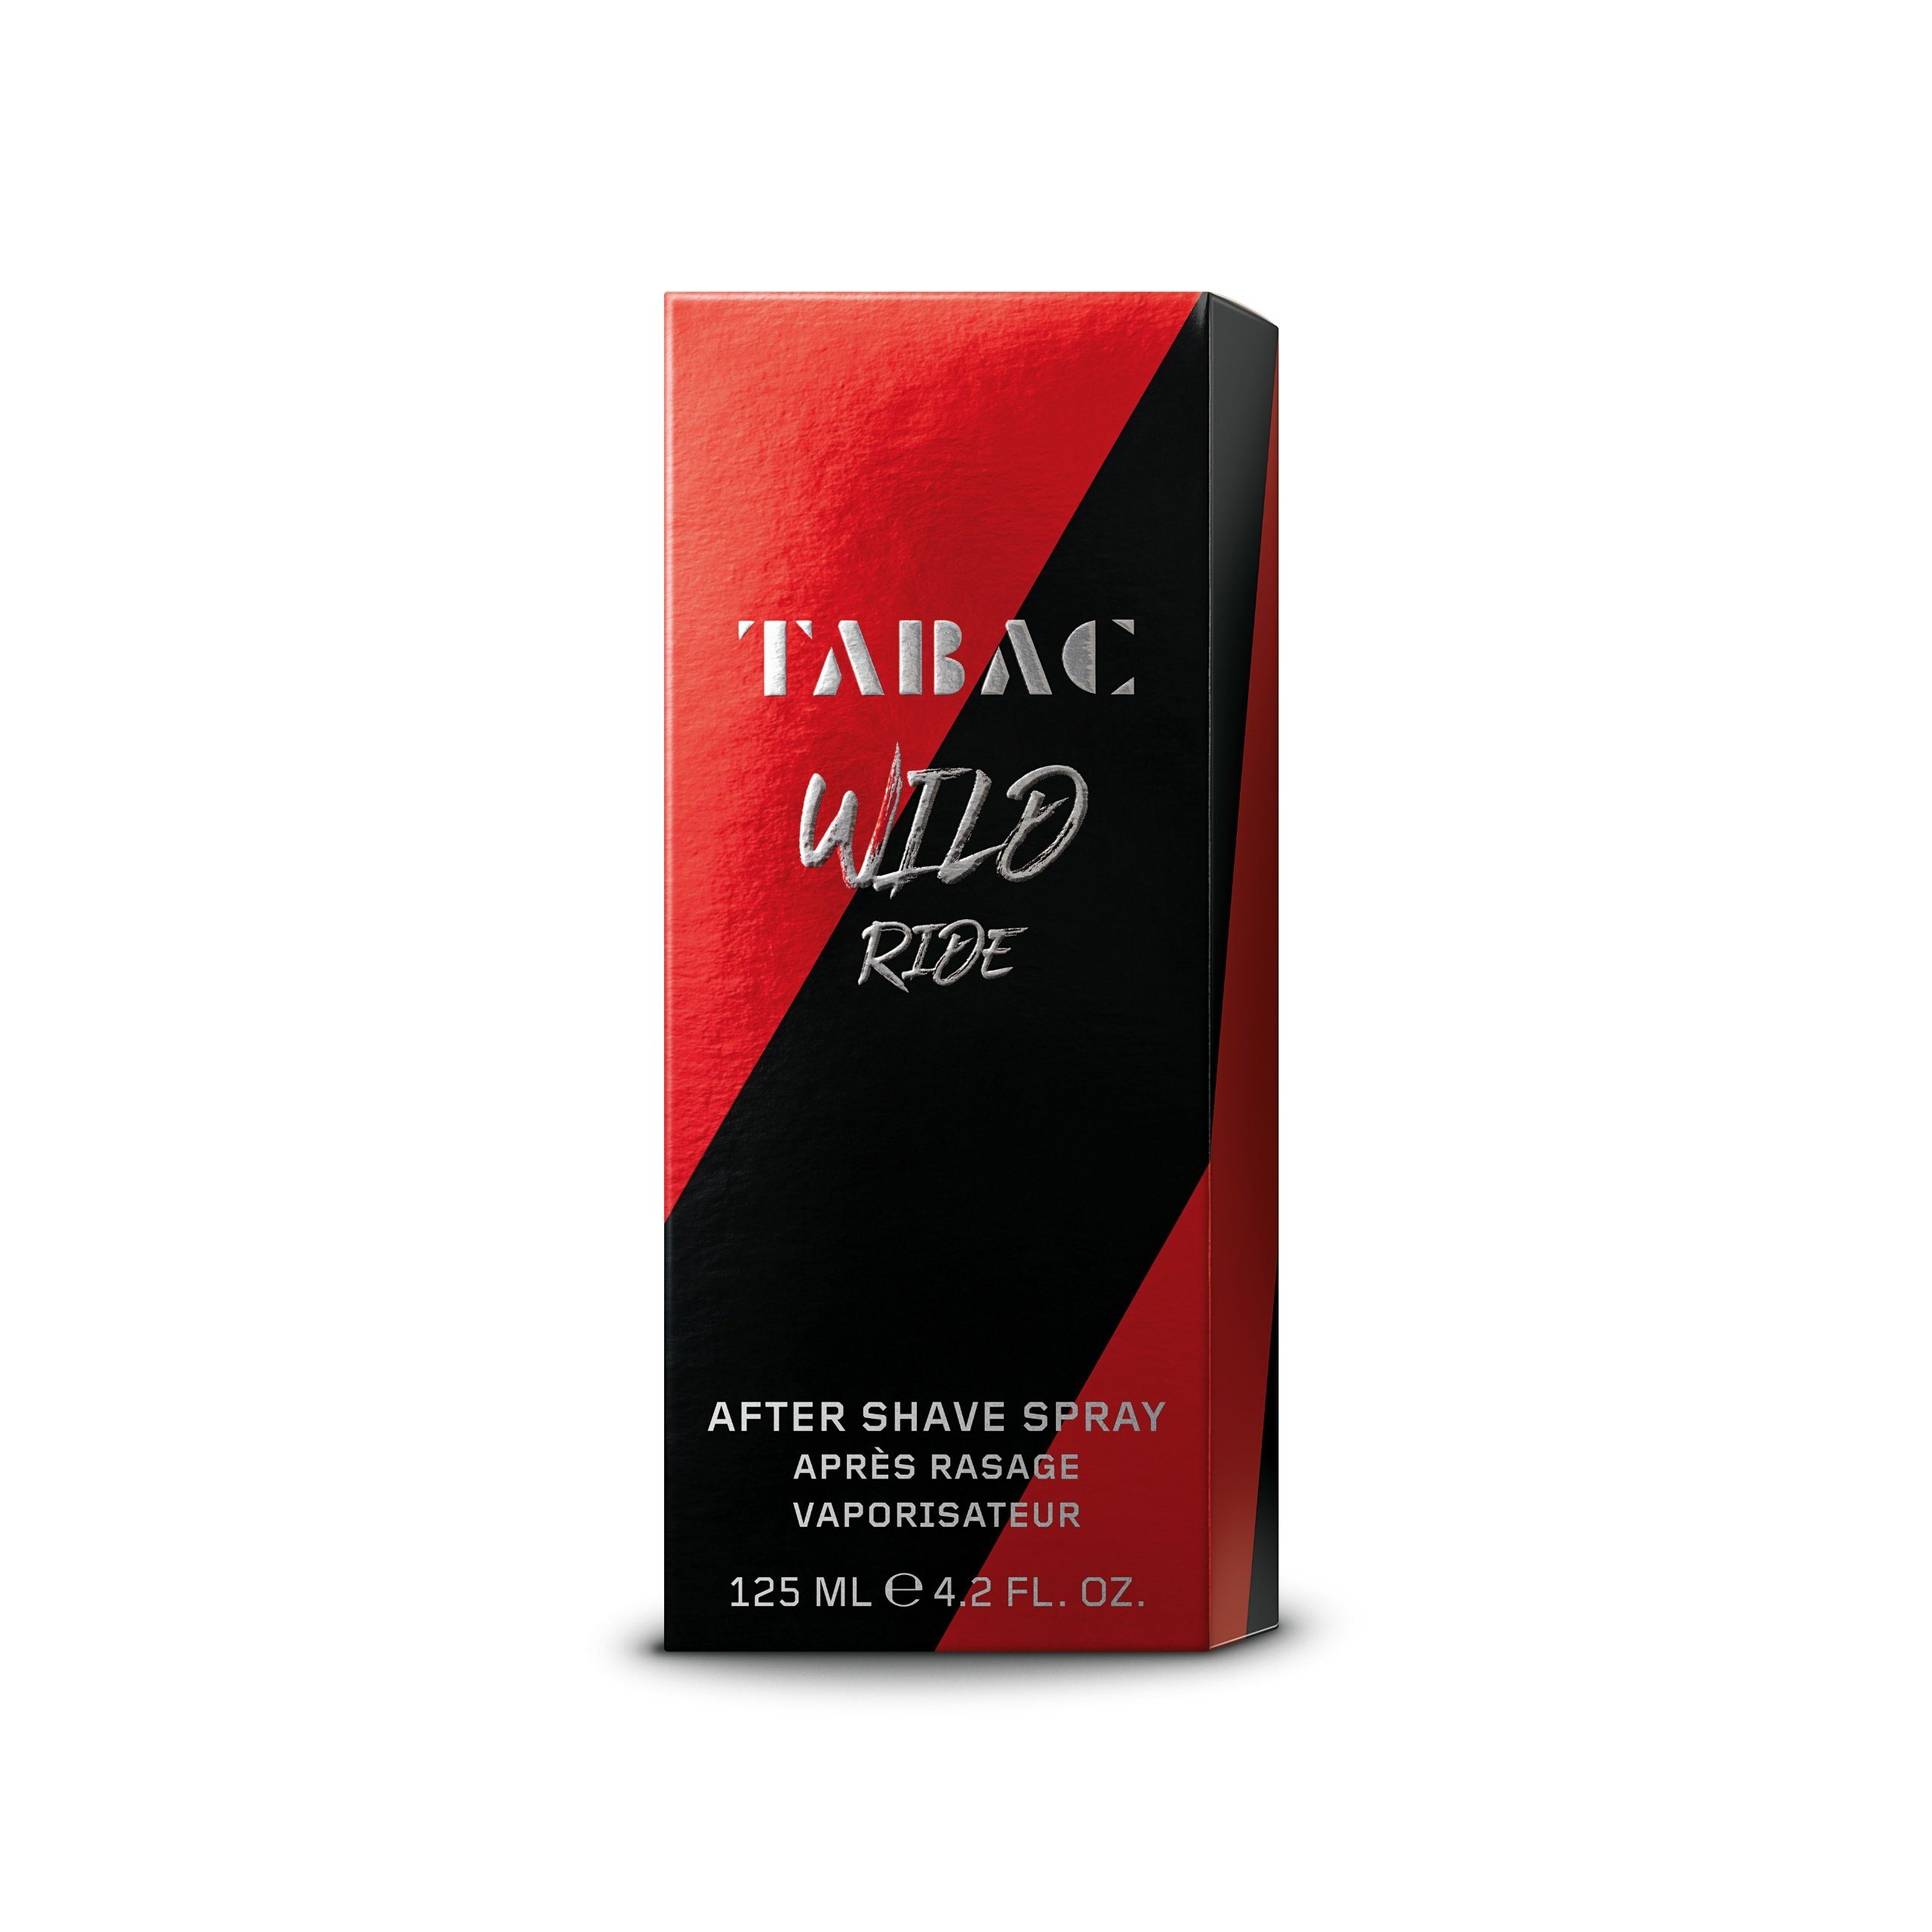 ml Wild Ride Shave 125 Gesichts-Reinigungslotion Lotion After Wild Ride Tabac Tabac